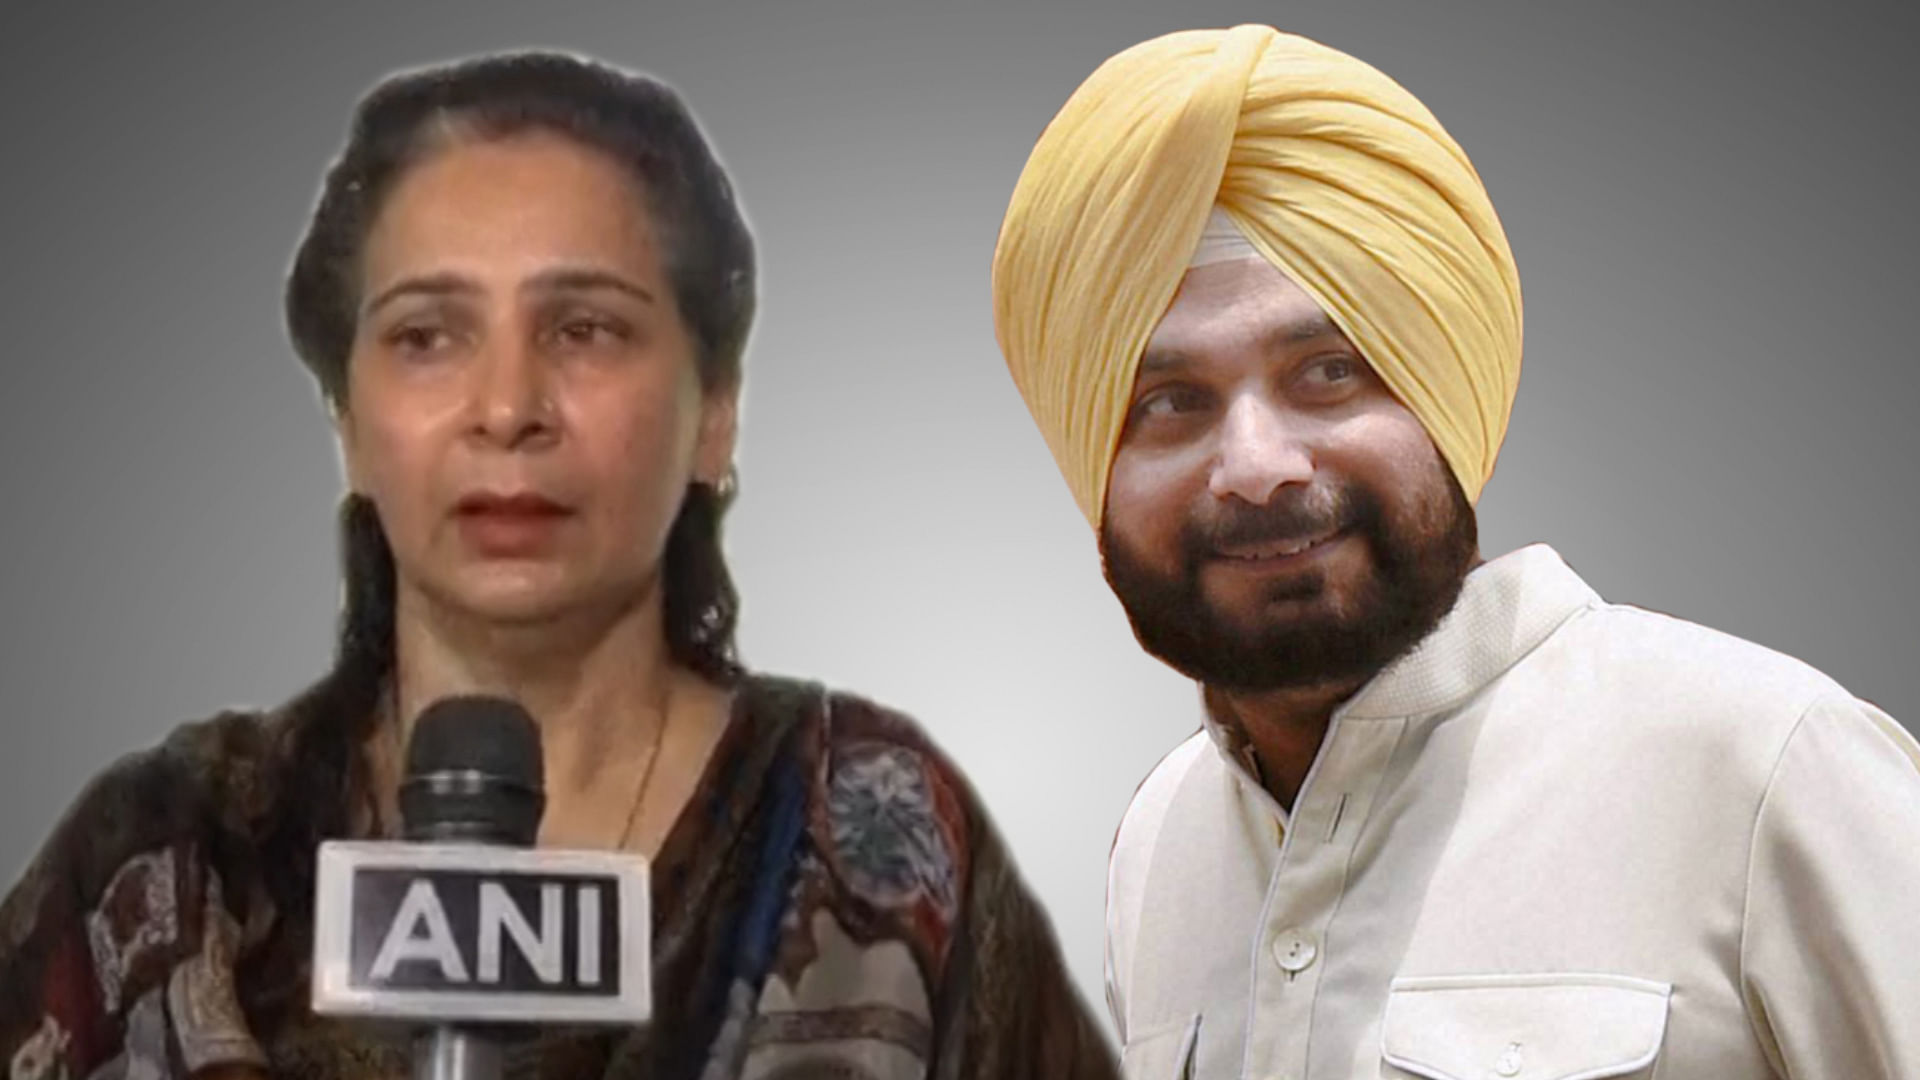 Navjot Singh Sidhu refused to react to the SAD’s demands for his dismissal and lodging of an FIR against his wife Navjot Kaur Sidhu, over the Amritsar train incident on Dussehra.